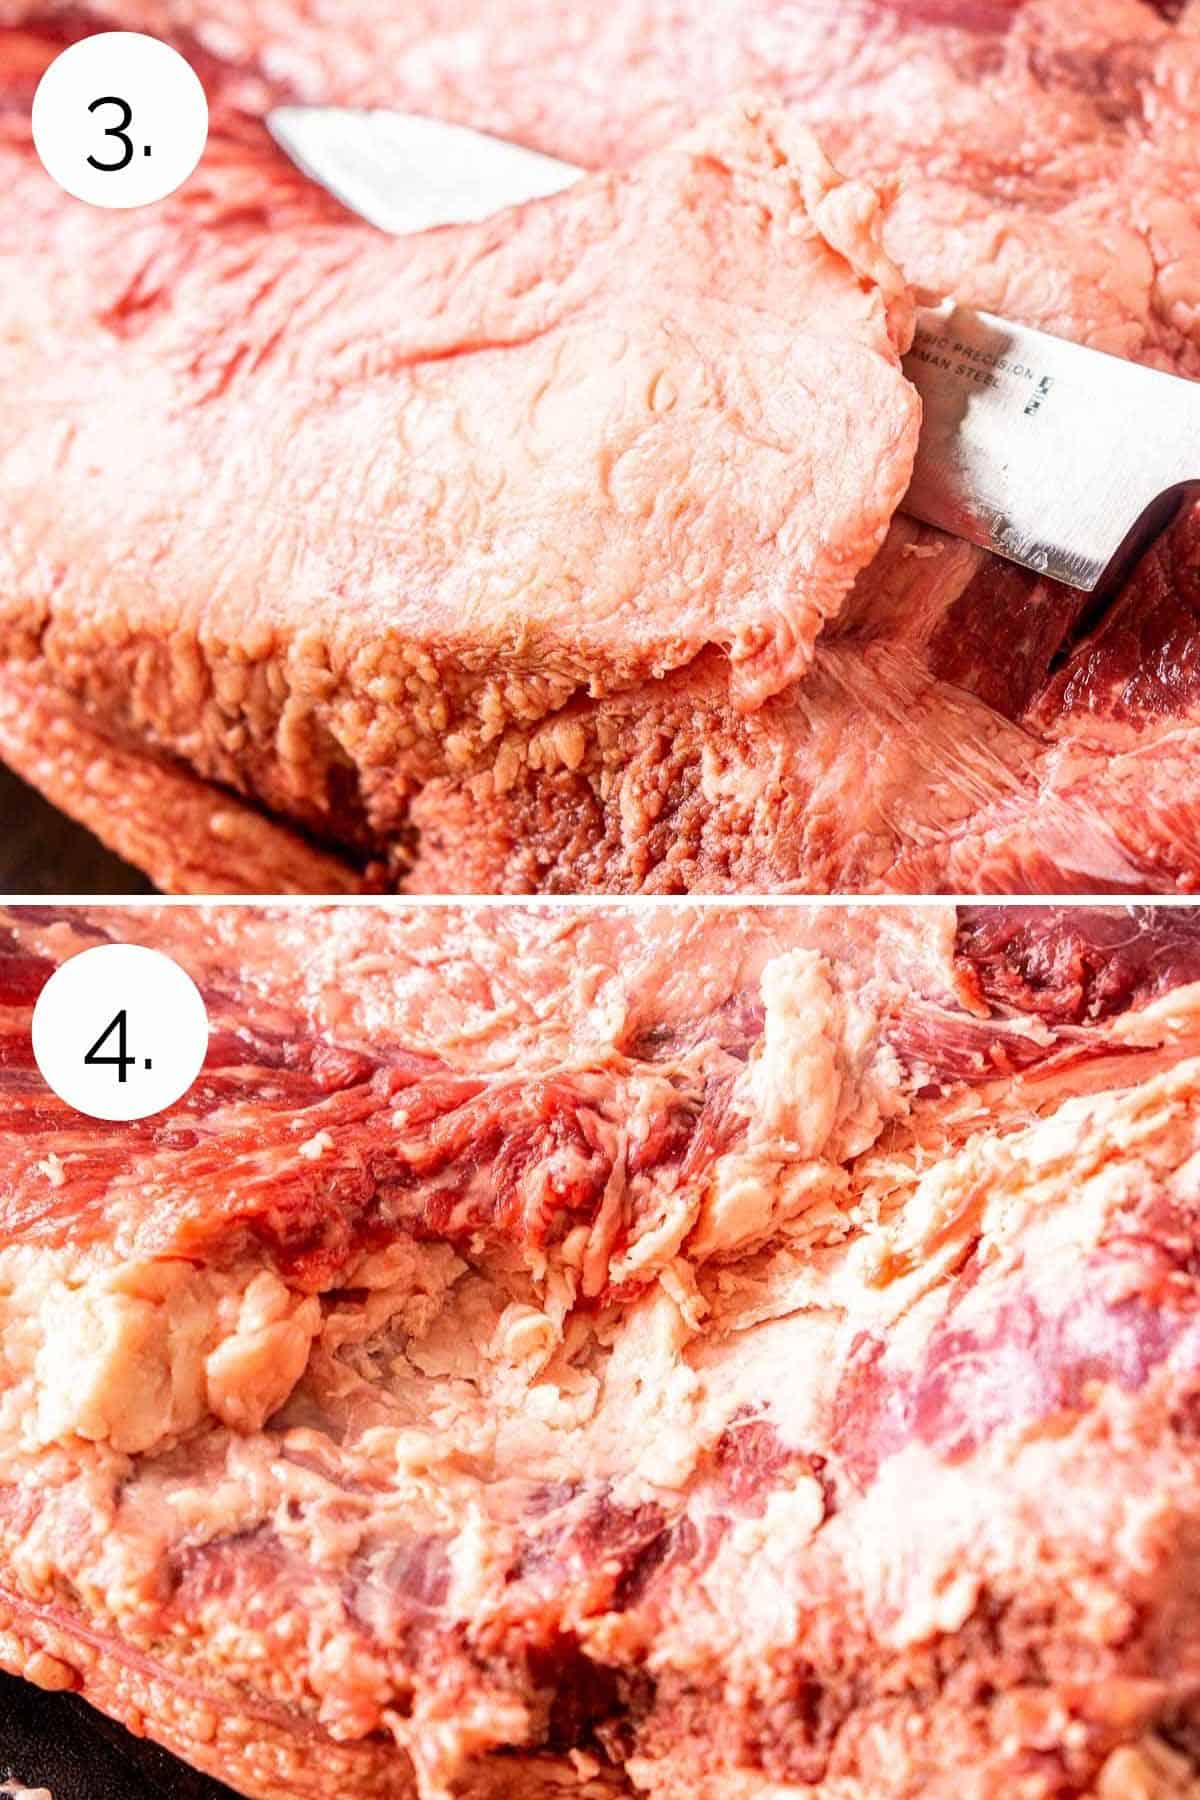 Showing the process of trimming the hard fat on the the underside of the brisket.